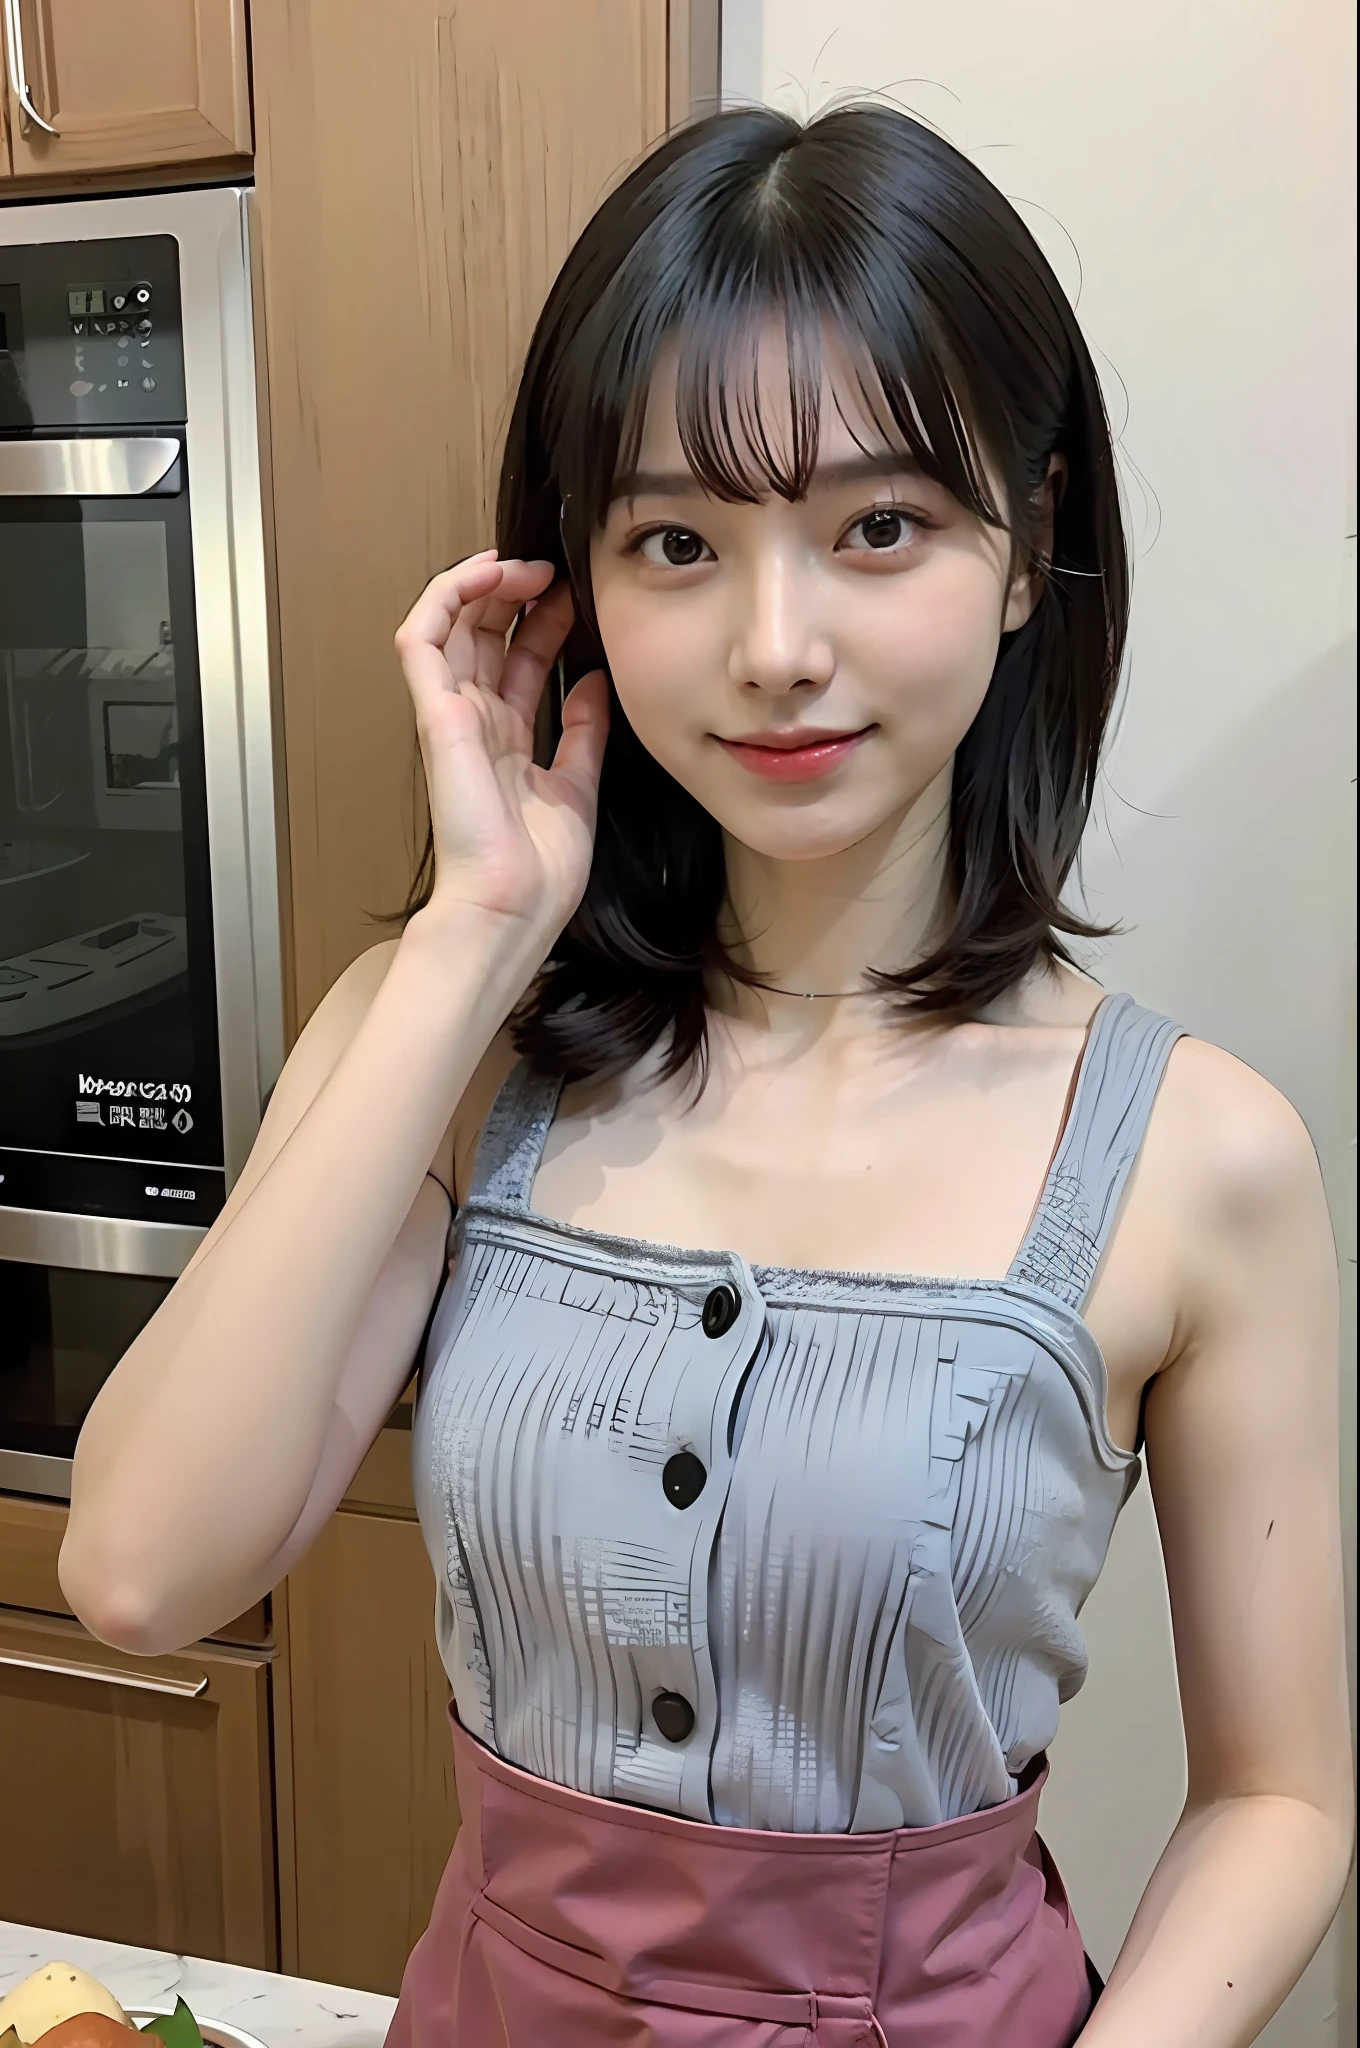 a woman is cooking、(kitchin_apron:1.Wear 3)、Good Hand、4K、hight resolution、​masterpiece、top-quality、cape:1.3、((Hasselblad photo))、Fine skin、sharp focus、(lighting like a movie)、Soft lighting、dynamic ungle、[:(Detailed face:1.2):0.2]、Medium chest、sweats streamed skin:1.2、(((In the kitchen))) Cute smile　Viewer's Perspective　Colossal tits　Tying hair　Sleeveless　Put out your upper arm　Shoulders are sticking out　Cleanliness　Large kitchen　Beautiful kitchen　wine glasses　Show ears